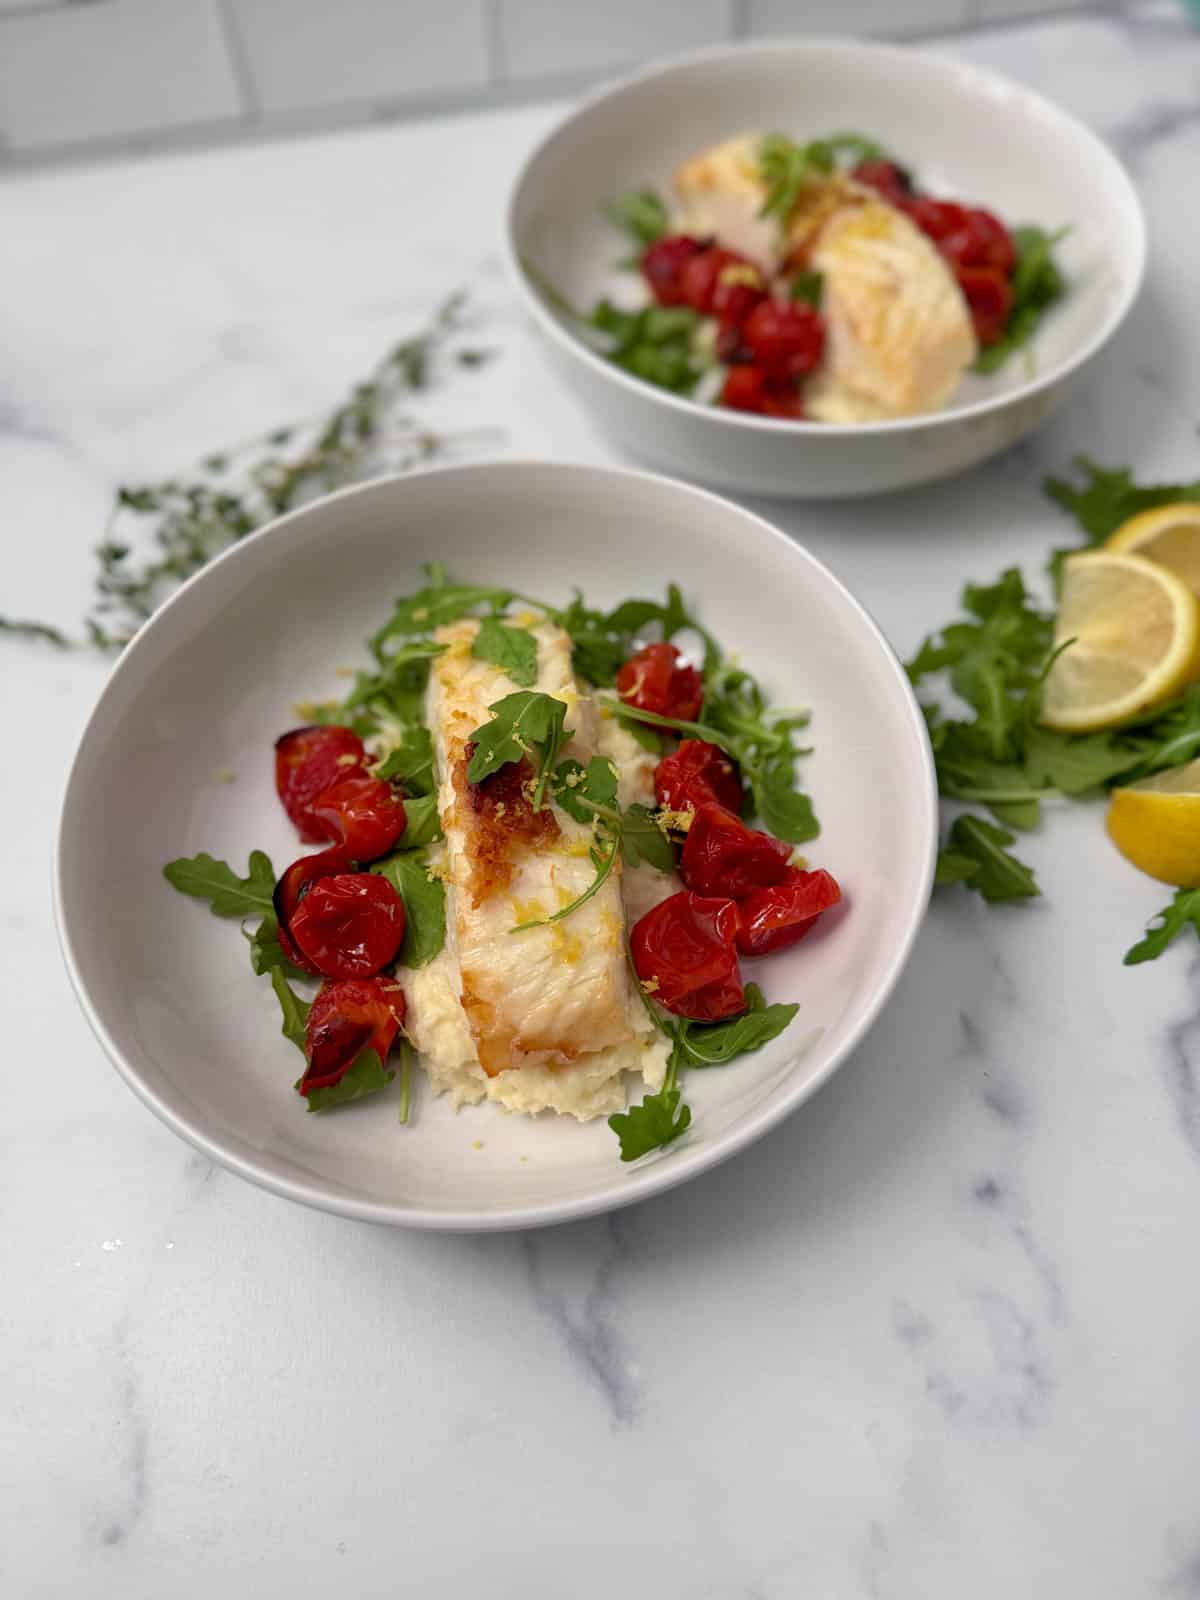 Pan seared fish in white bowls over mashed parsnips with roasted cherry tomatoes and arugula and lemons slices.